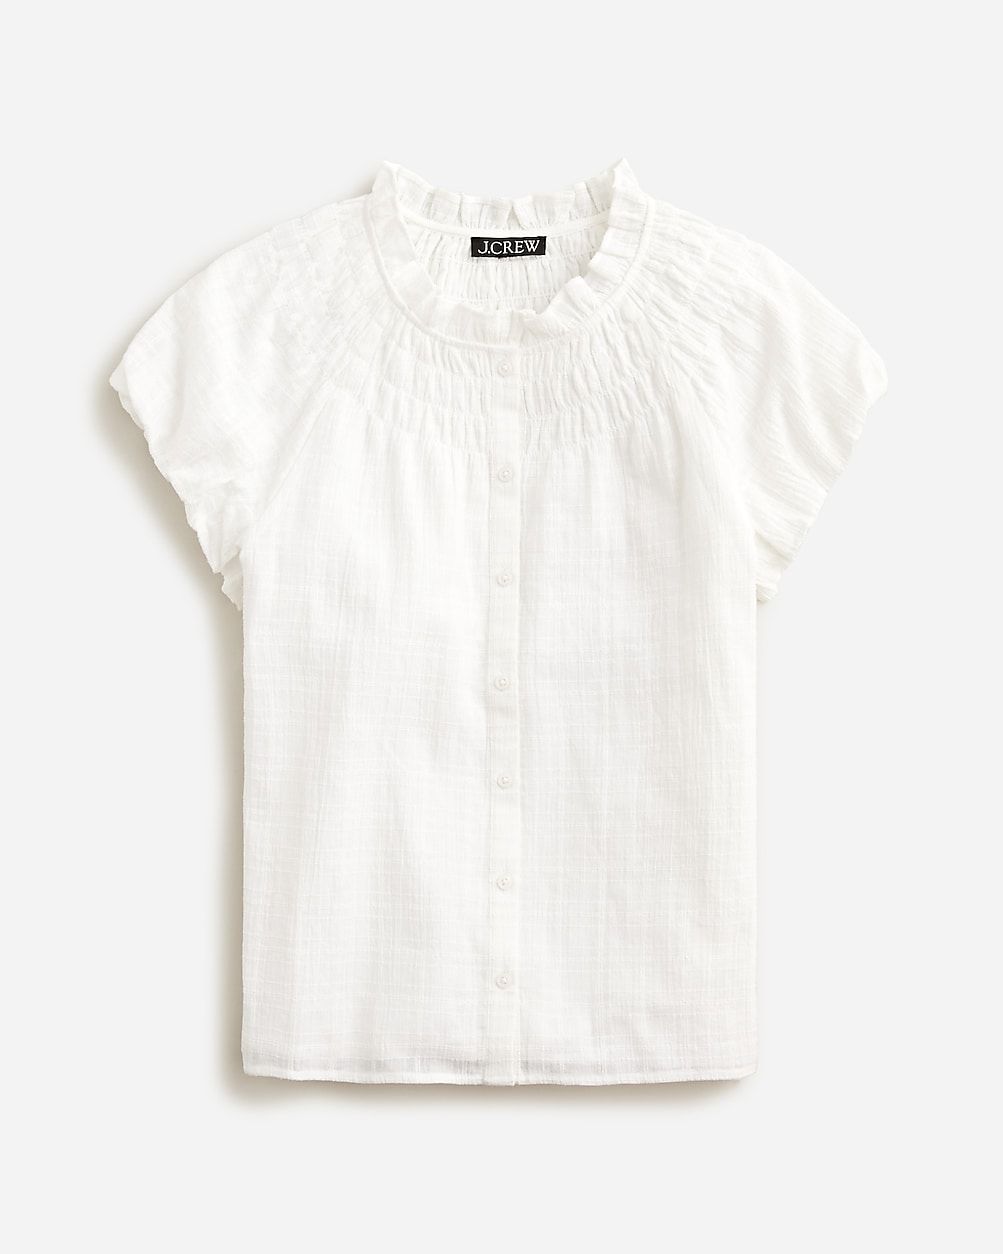 new4.5(2 REVIEWS)Smock-neck top in textured gauze$89.50WhiteSelect a sizeSize & Fit InformationVi... | J.Crew US